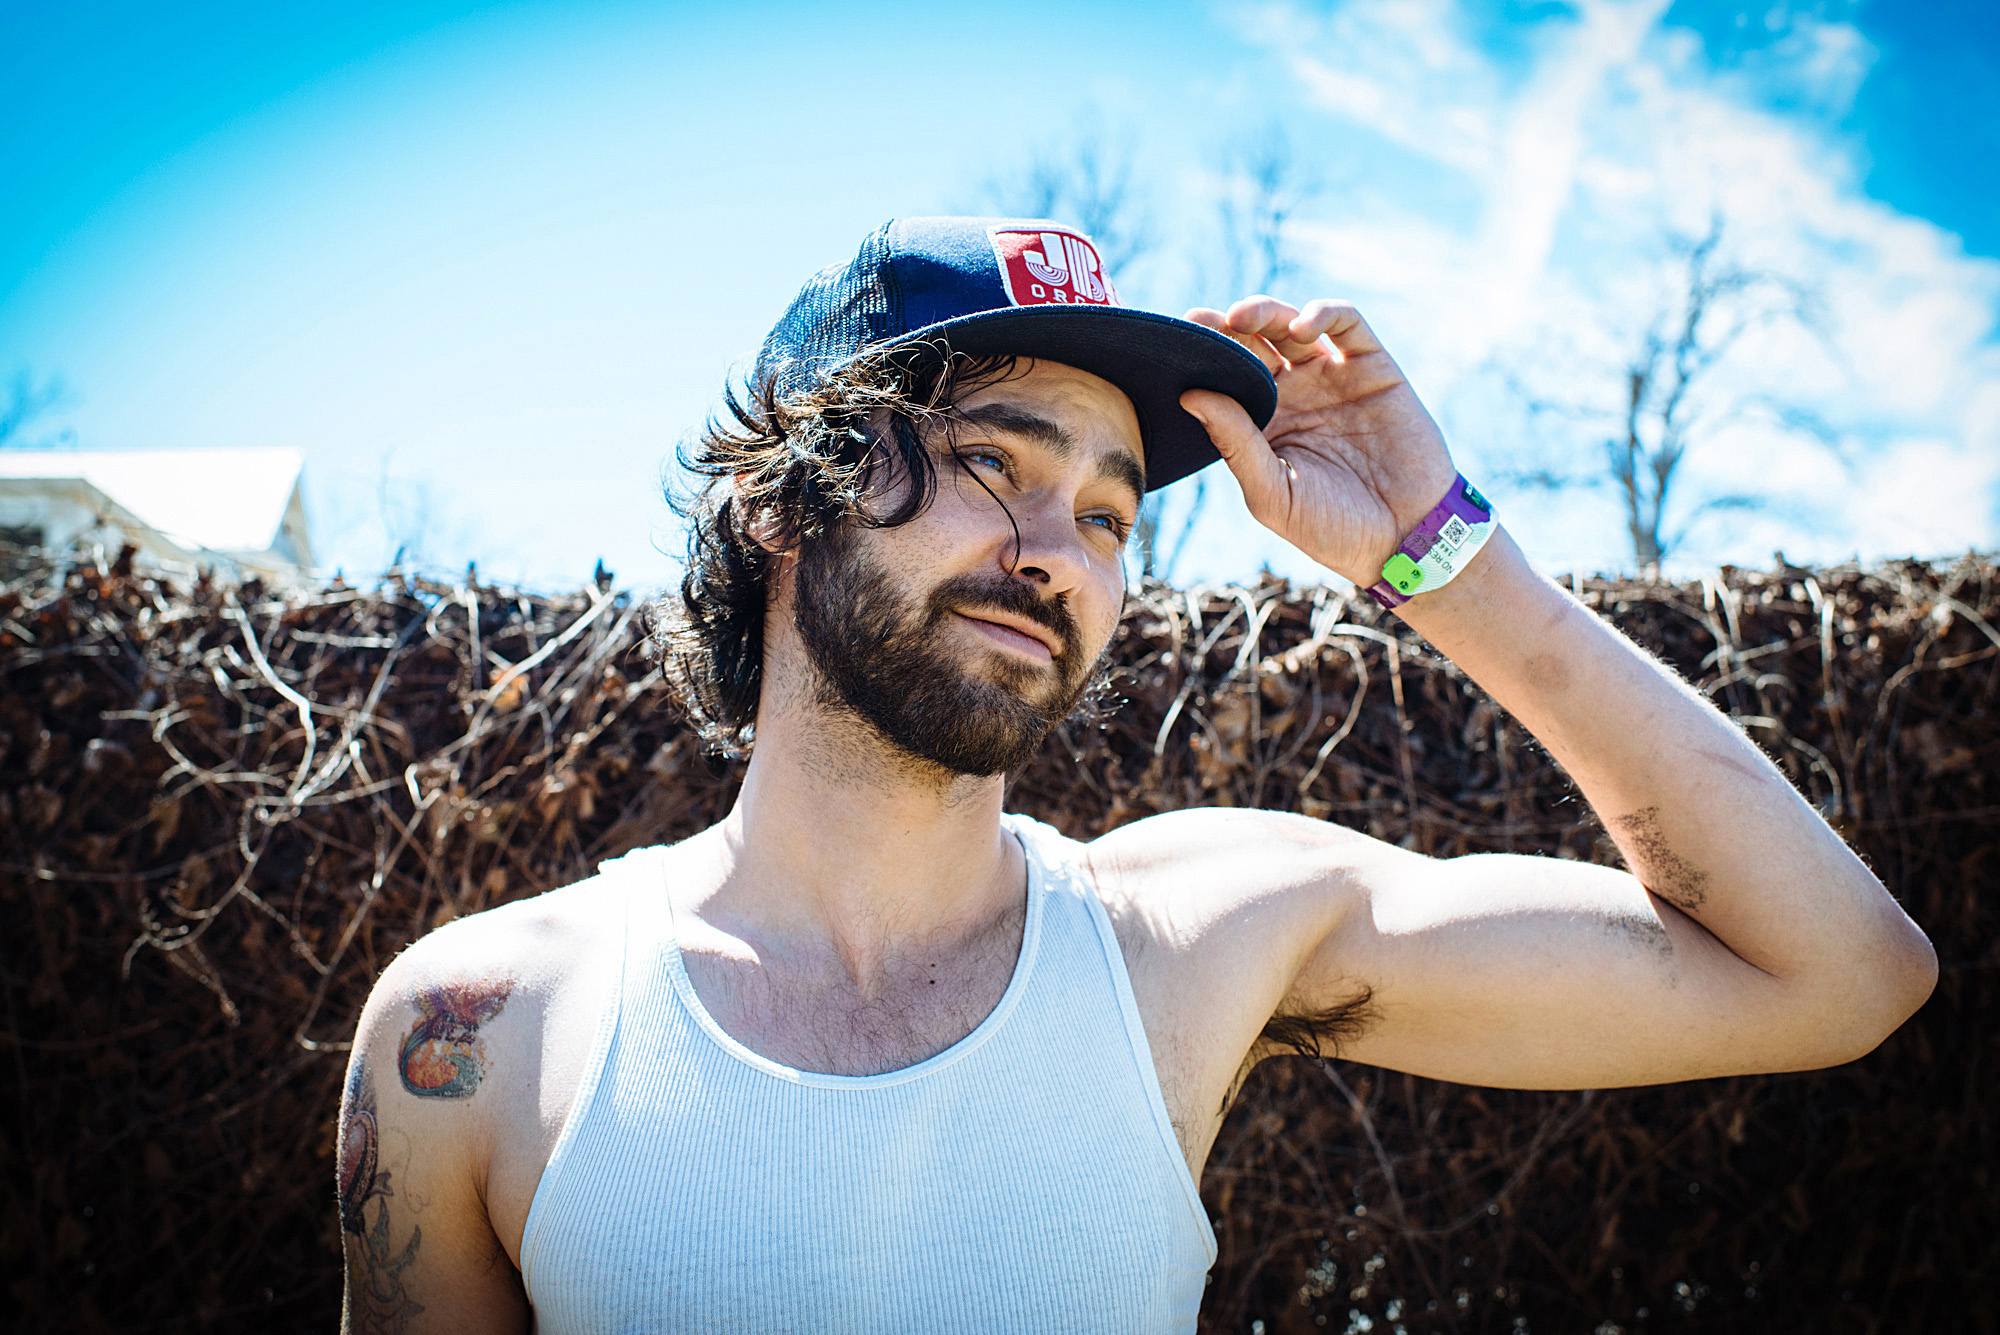 Shakey Graves pledges proceeds toward positive change | Lone Star Music Mag...